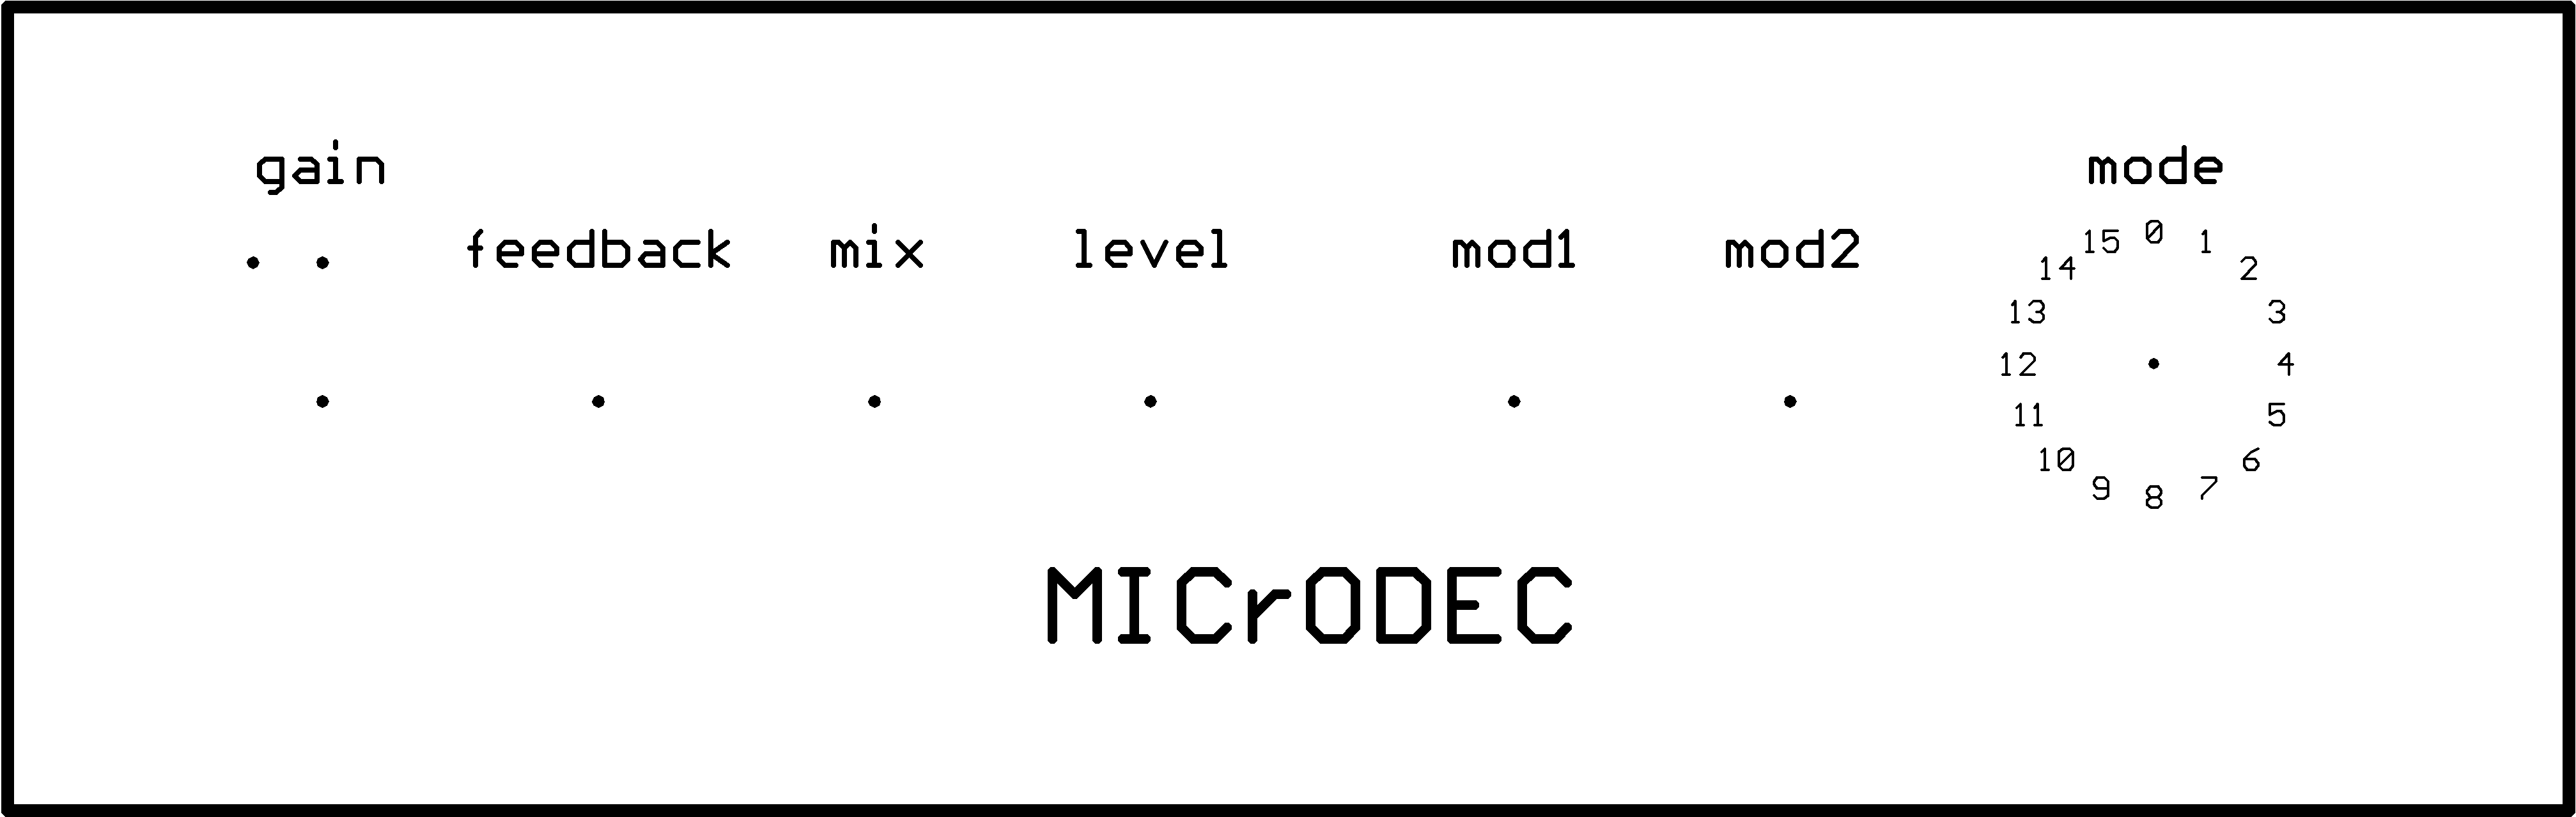 microdec_front2.png